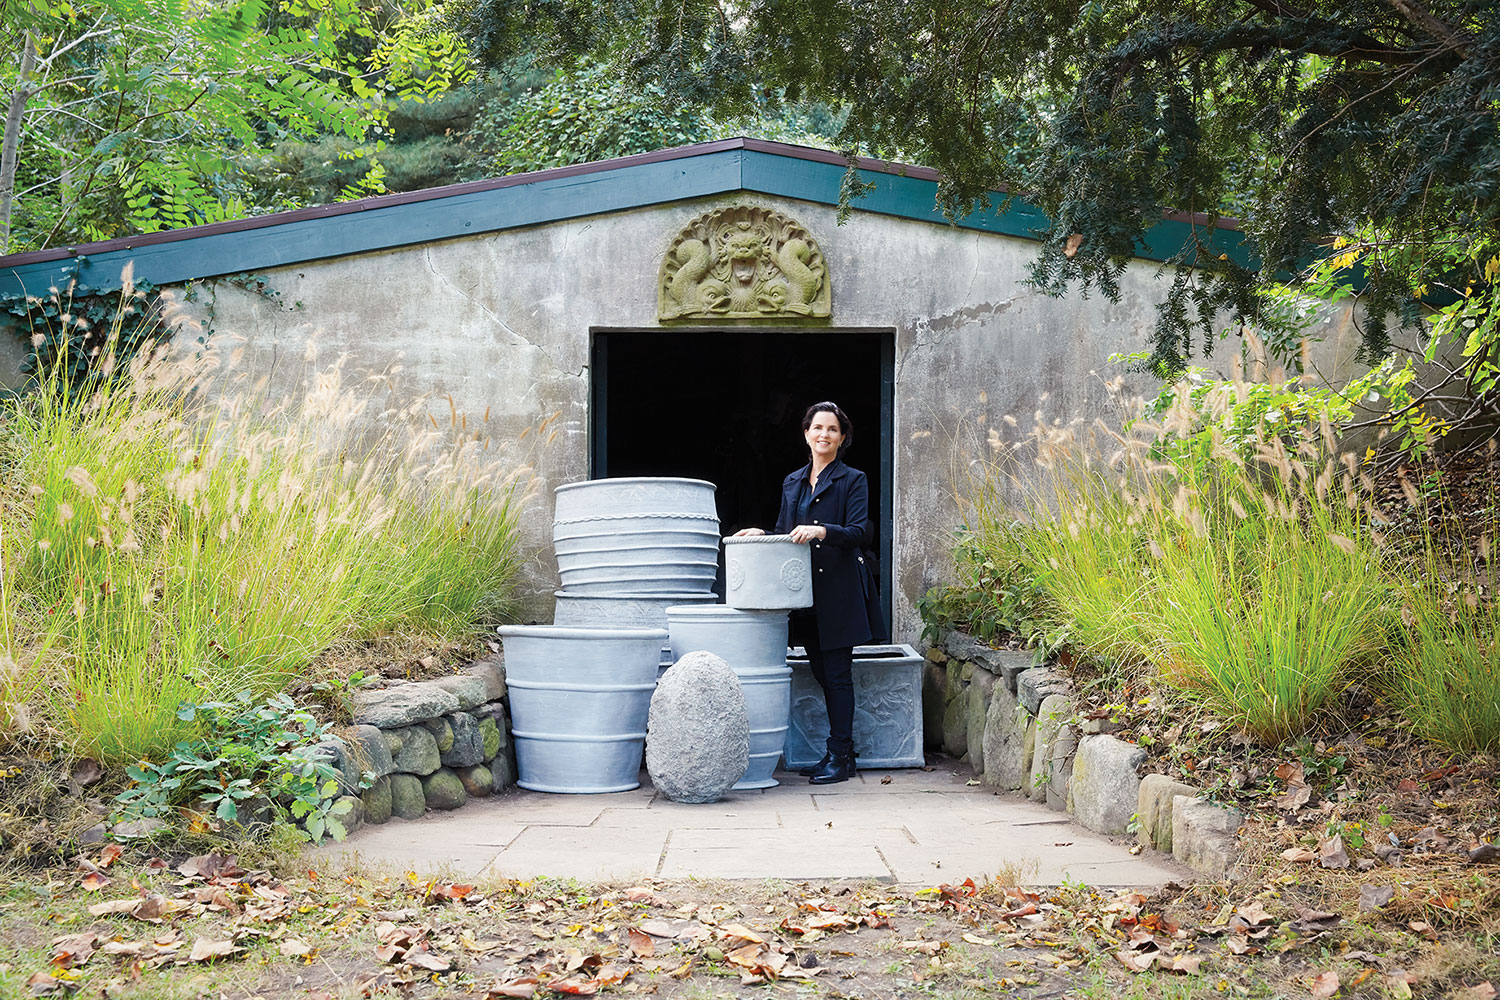 Newman stands in the doorway of a stuccoed shed with a collection of large planters. Trees and tall grasses surround the area.